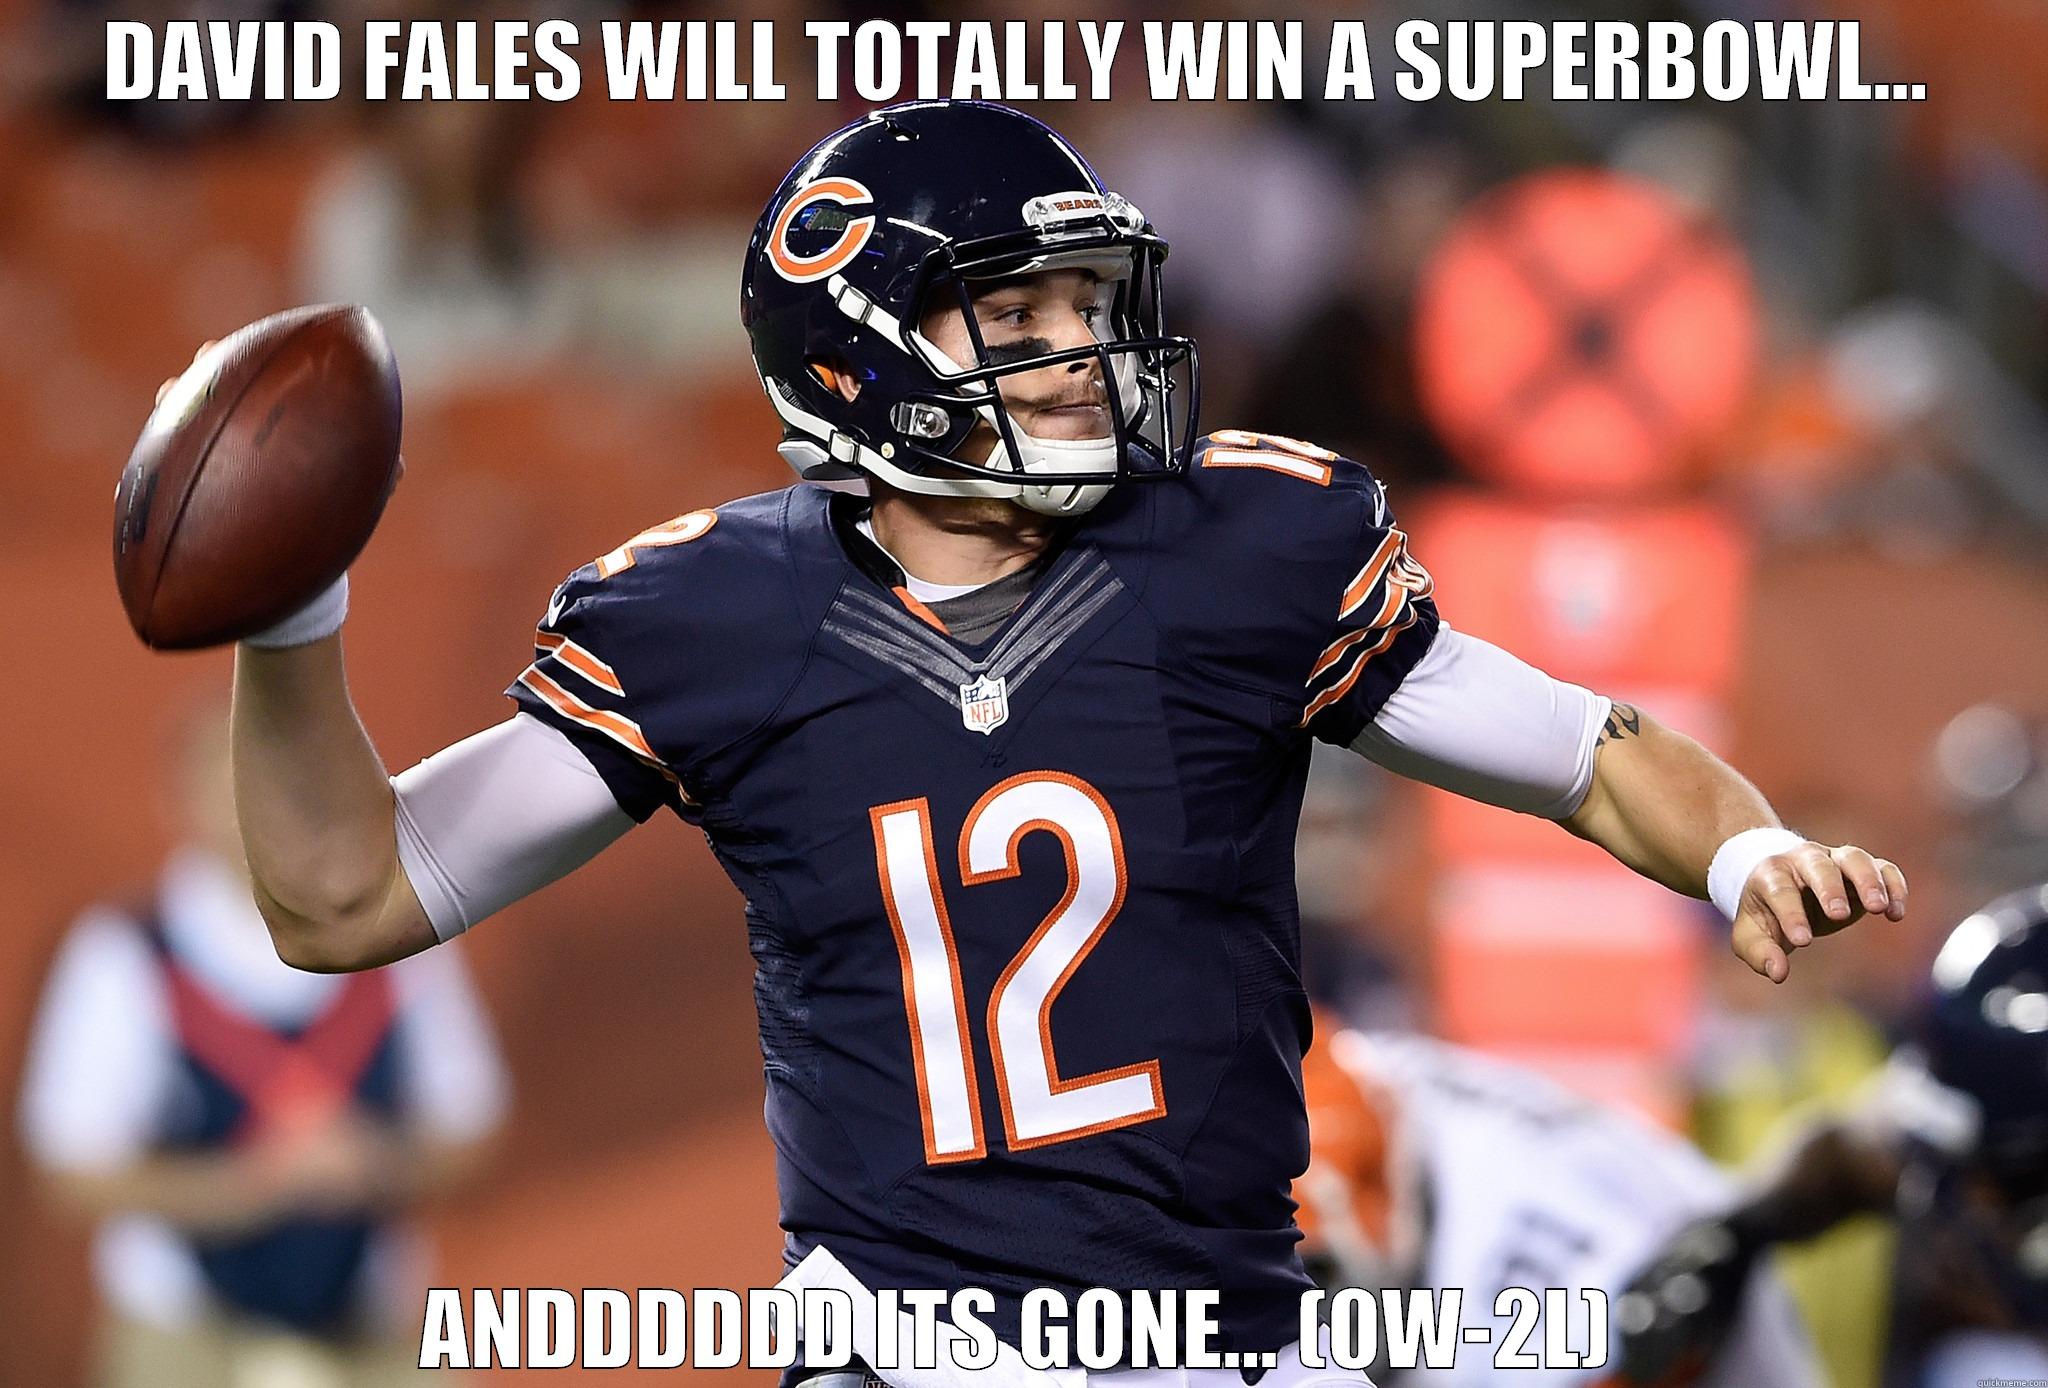 DAVID FALES WILL TOTALLY WIN A SUPERBOWL... ANDDDDDD ITS GONE... (0W-2L) Misc